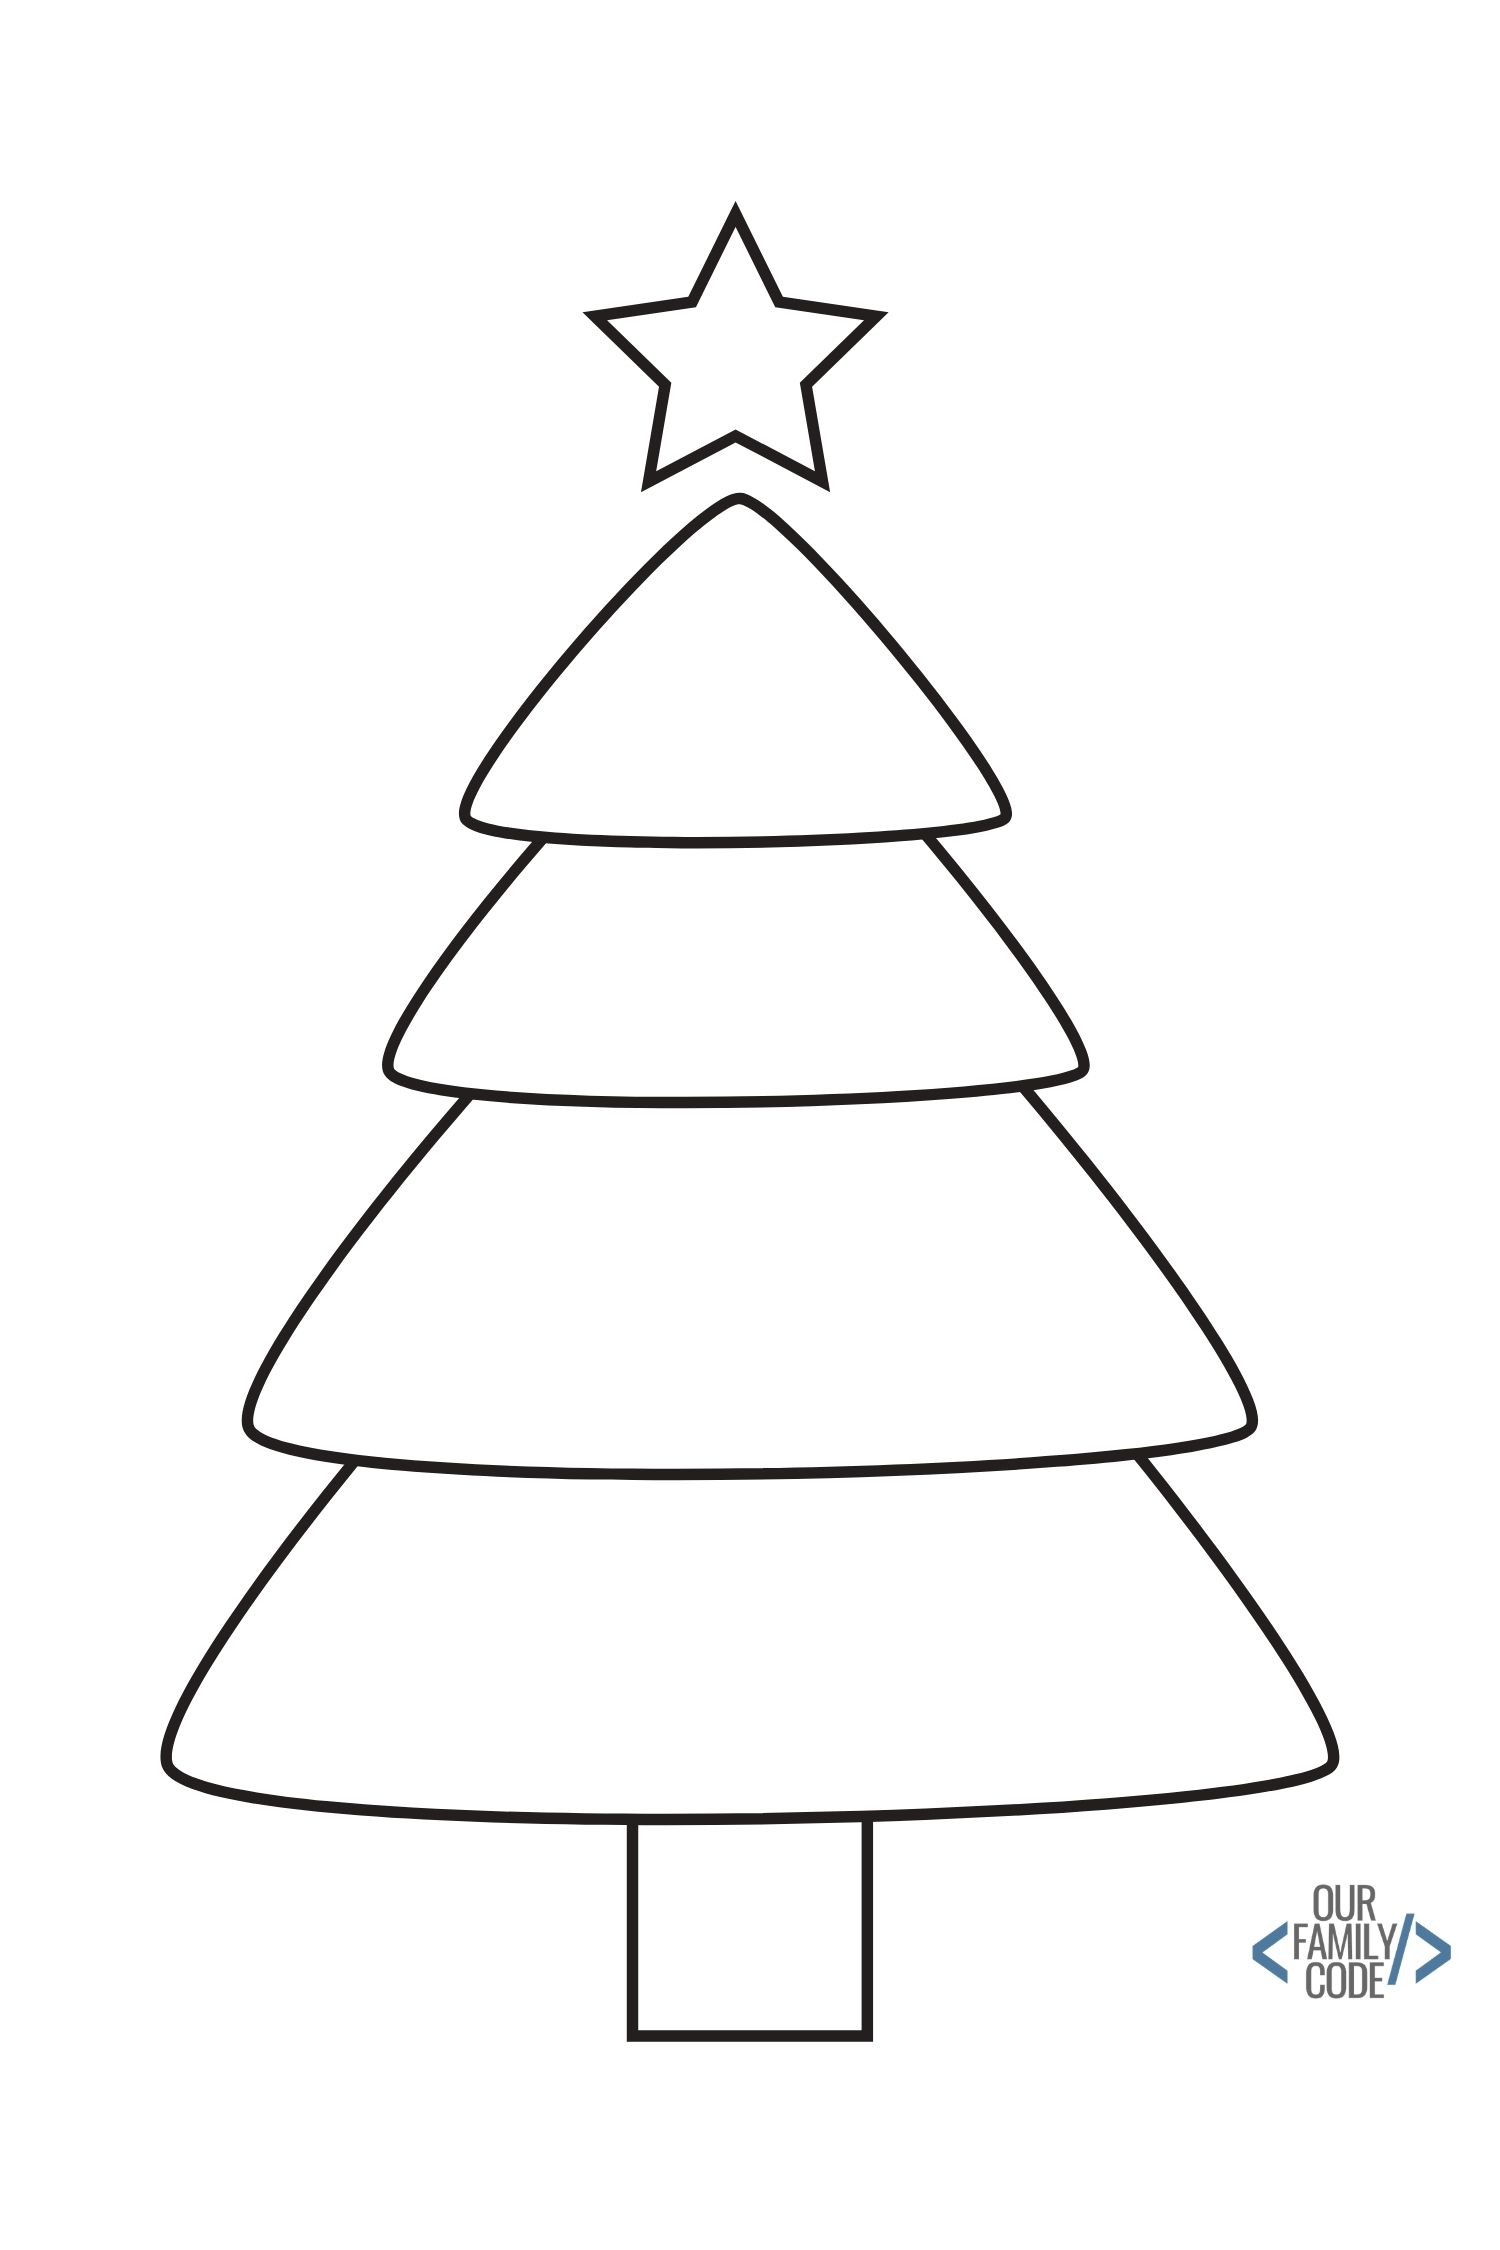 12 days of Free Christmas Worksheets for Kids Free Download Tree Coloring Page